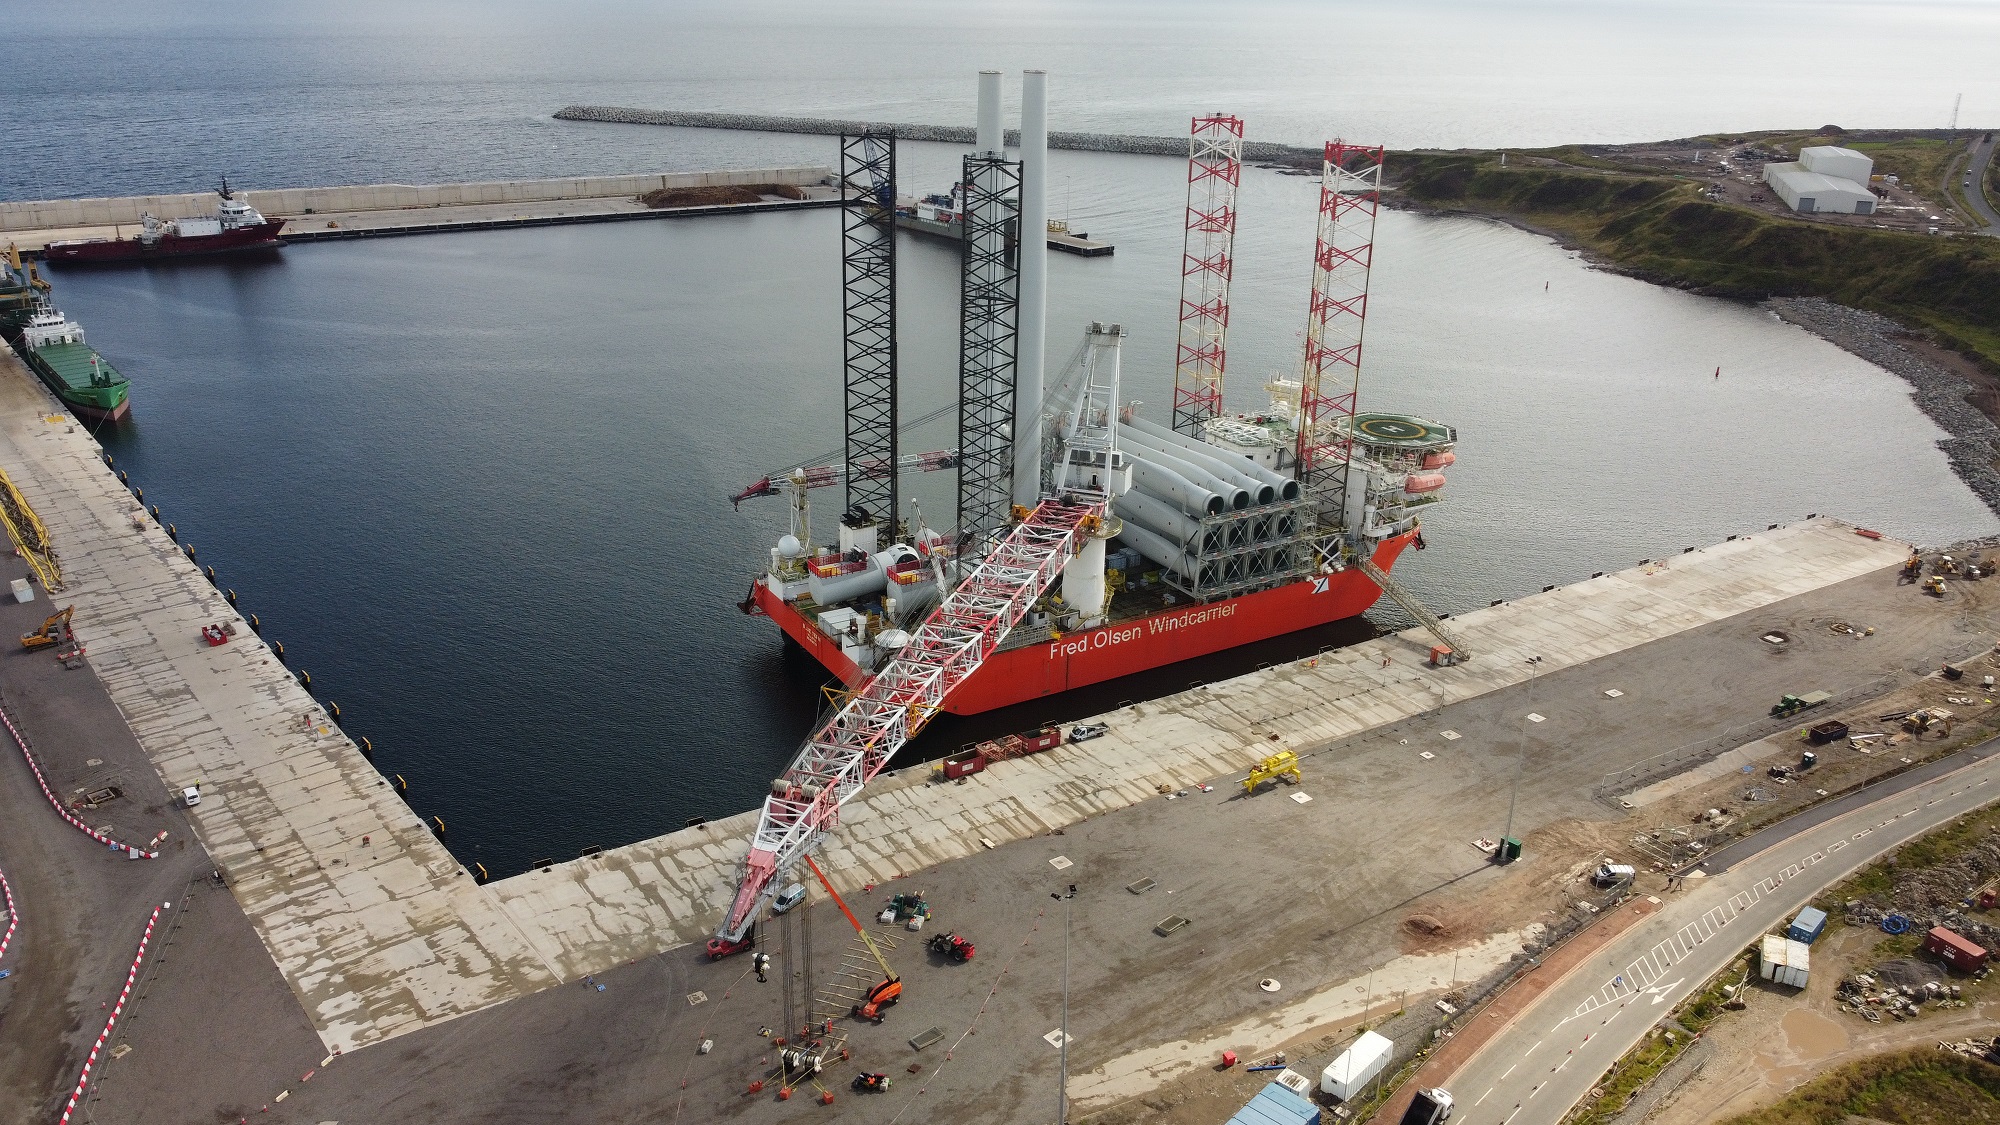 MEMBER NEWS: Port of Aberdeen Advances in Strategic Investment Model for Offshore Wind